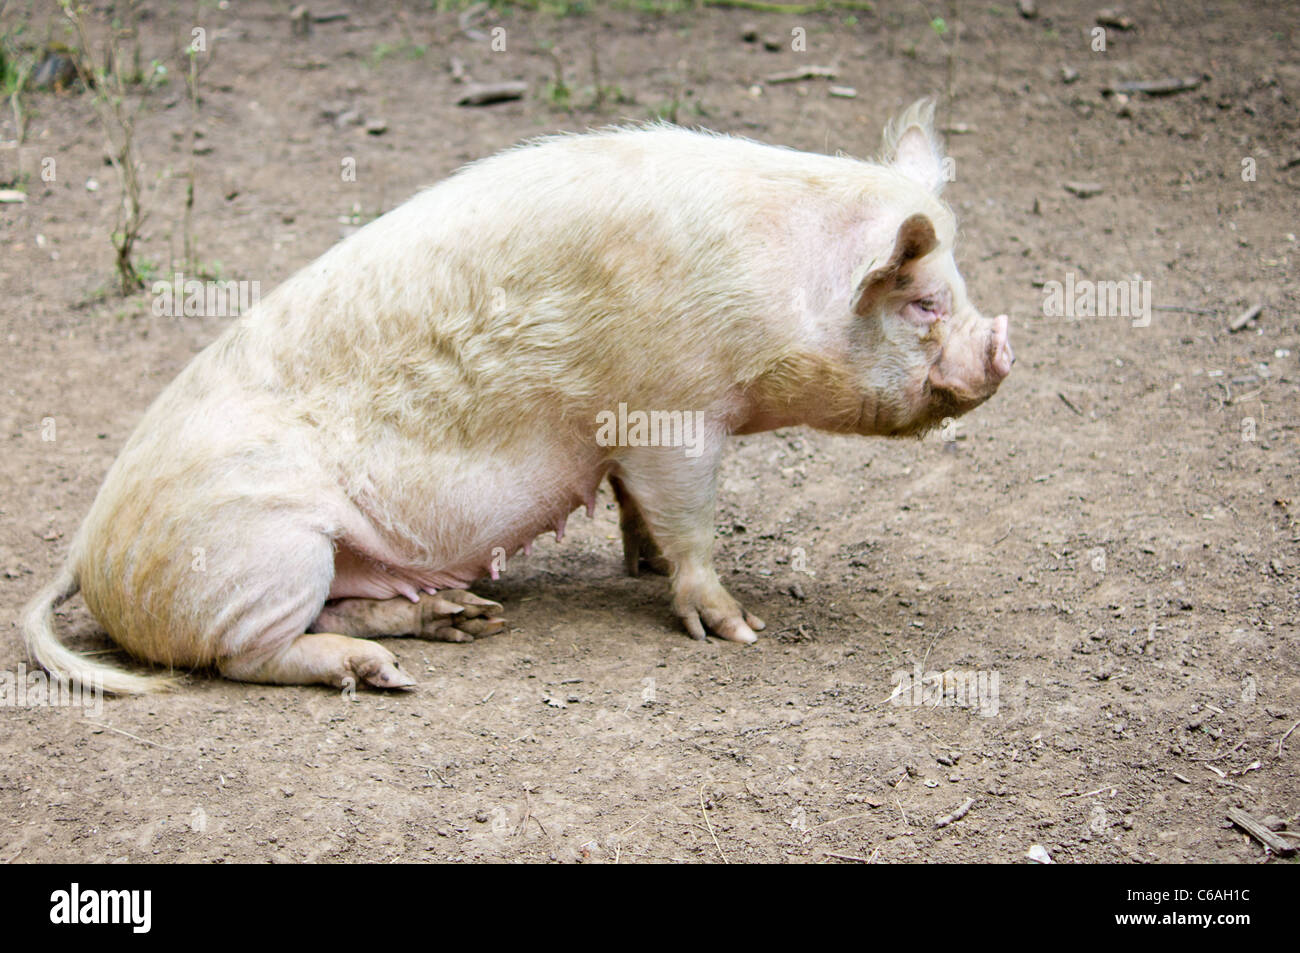 A white free range pig sat down in the dirt Stock Photo